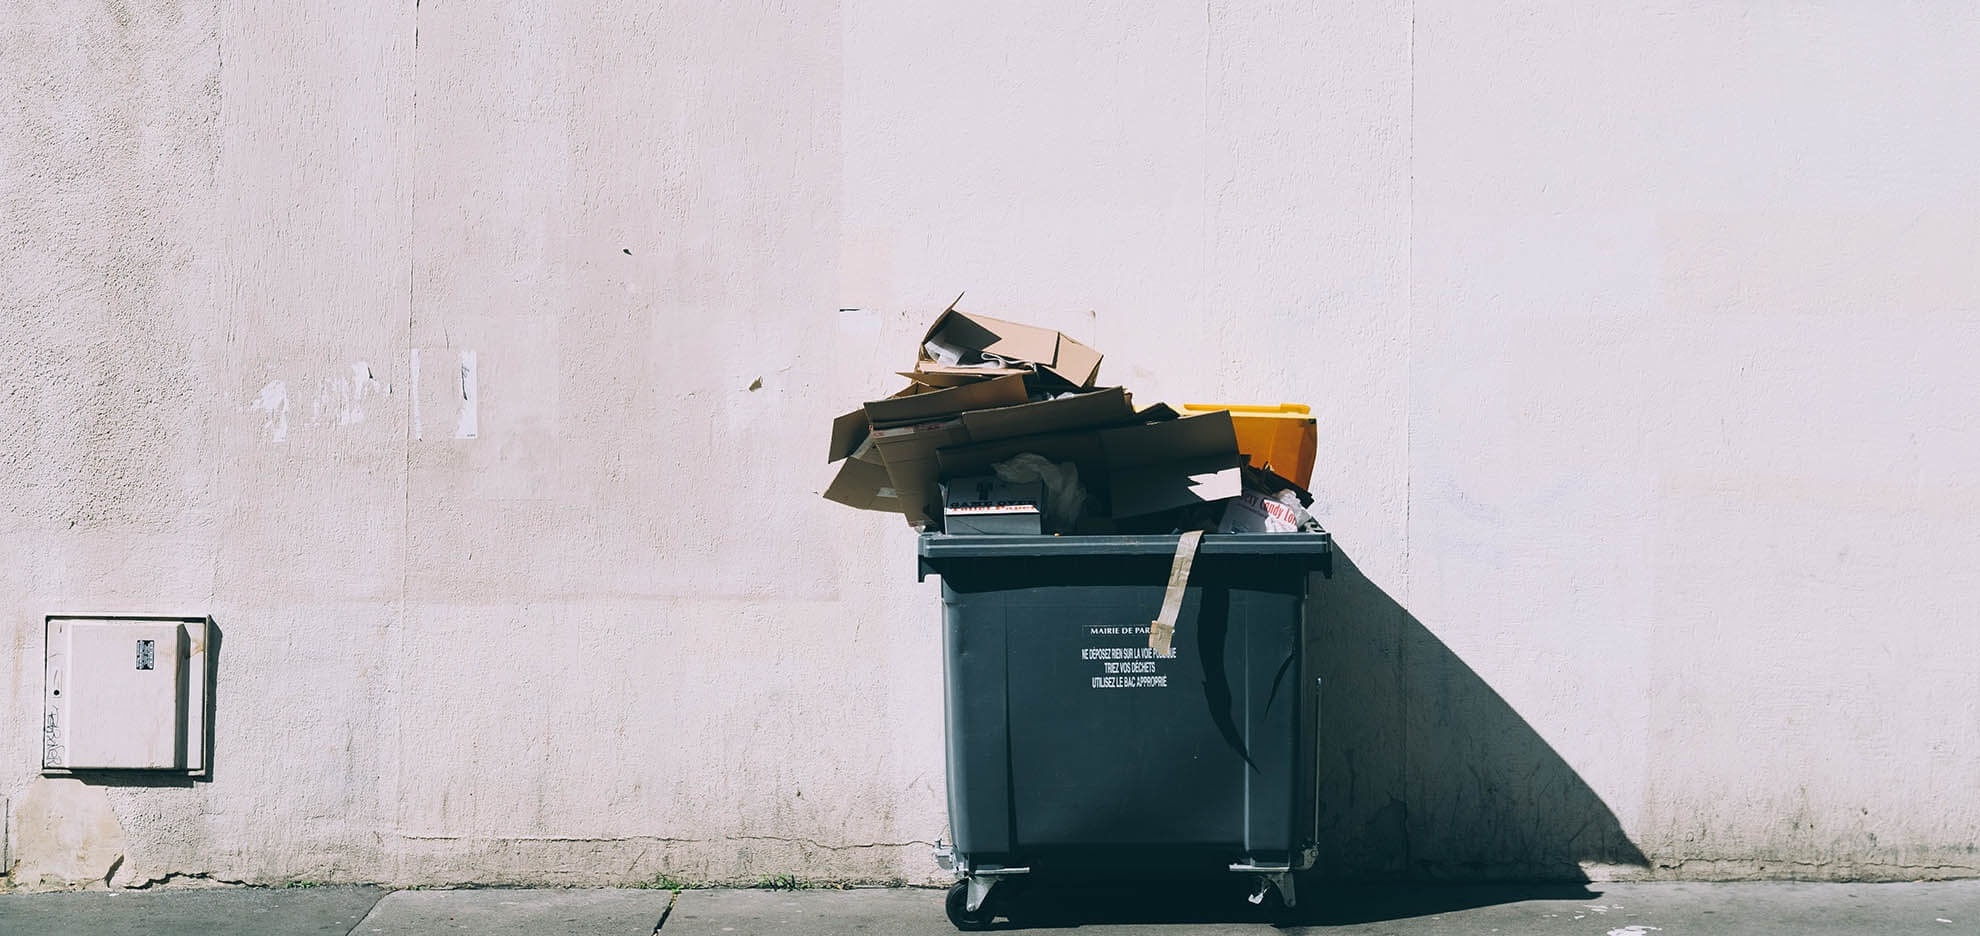 From nocturnal trucks to AI: how urban waste management is changing